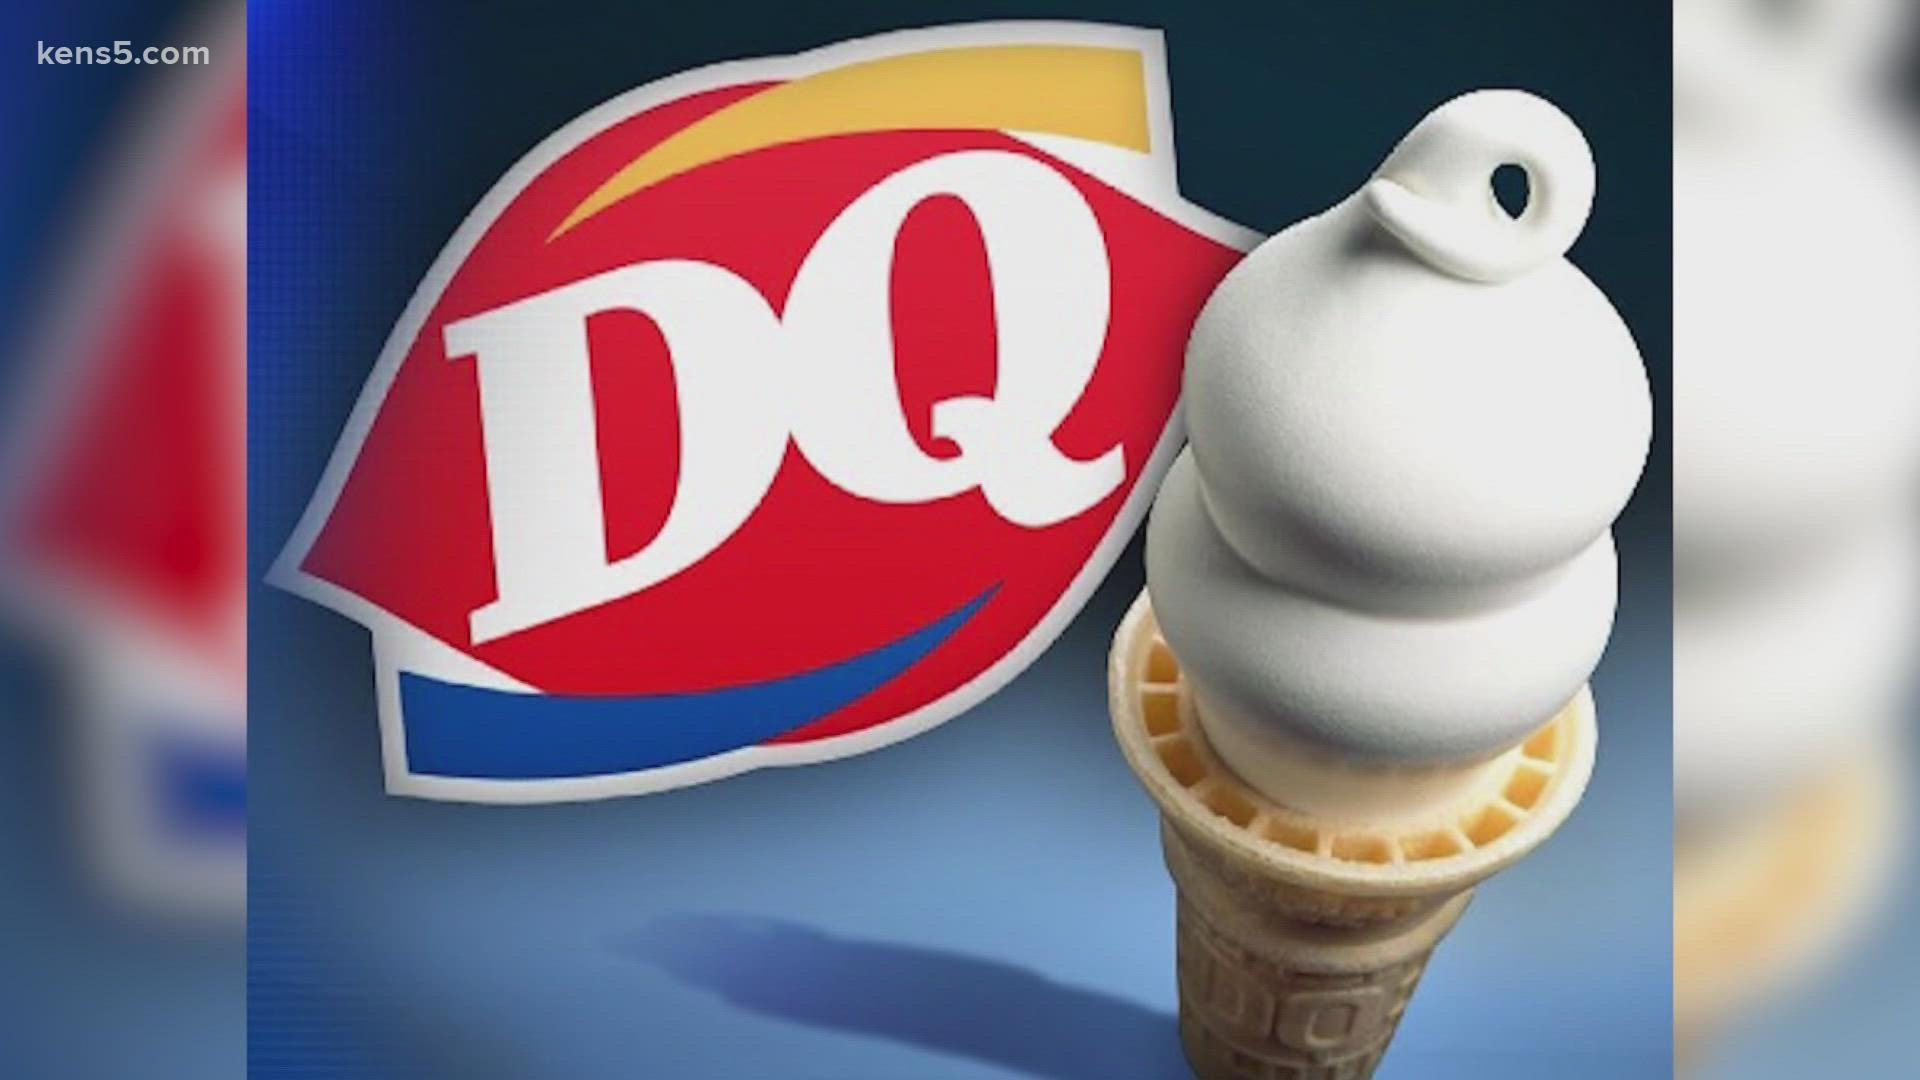 Dairy Queen offers 75cent cones to celebrate 75th anniversary